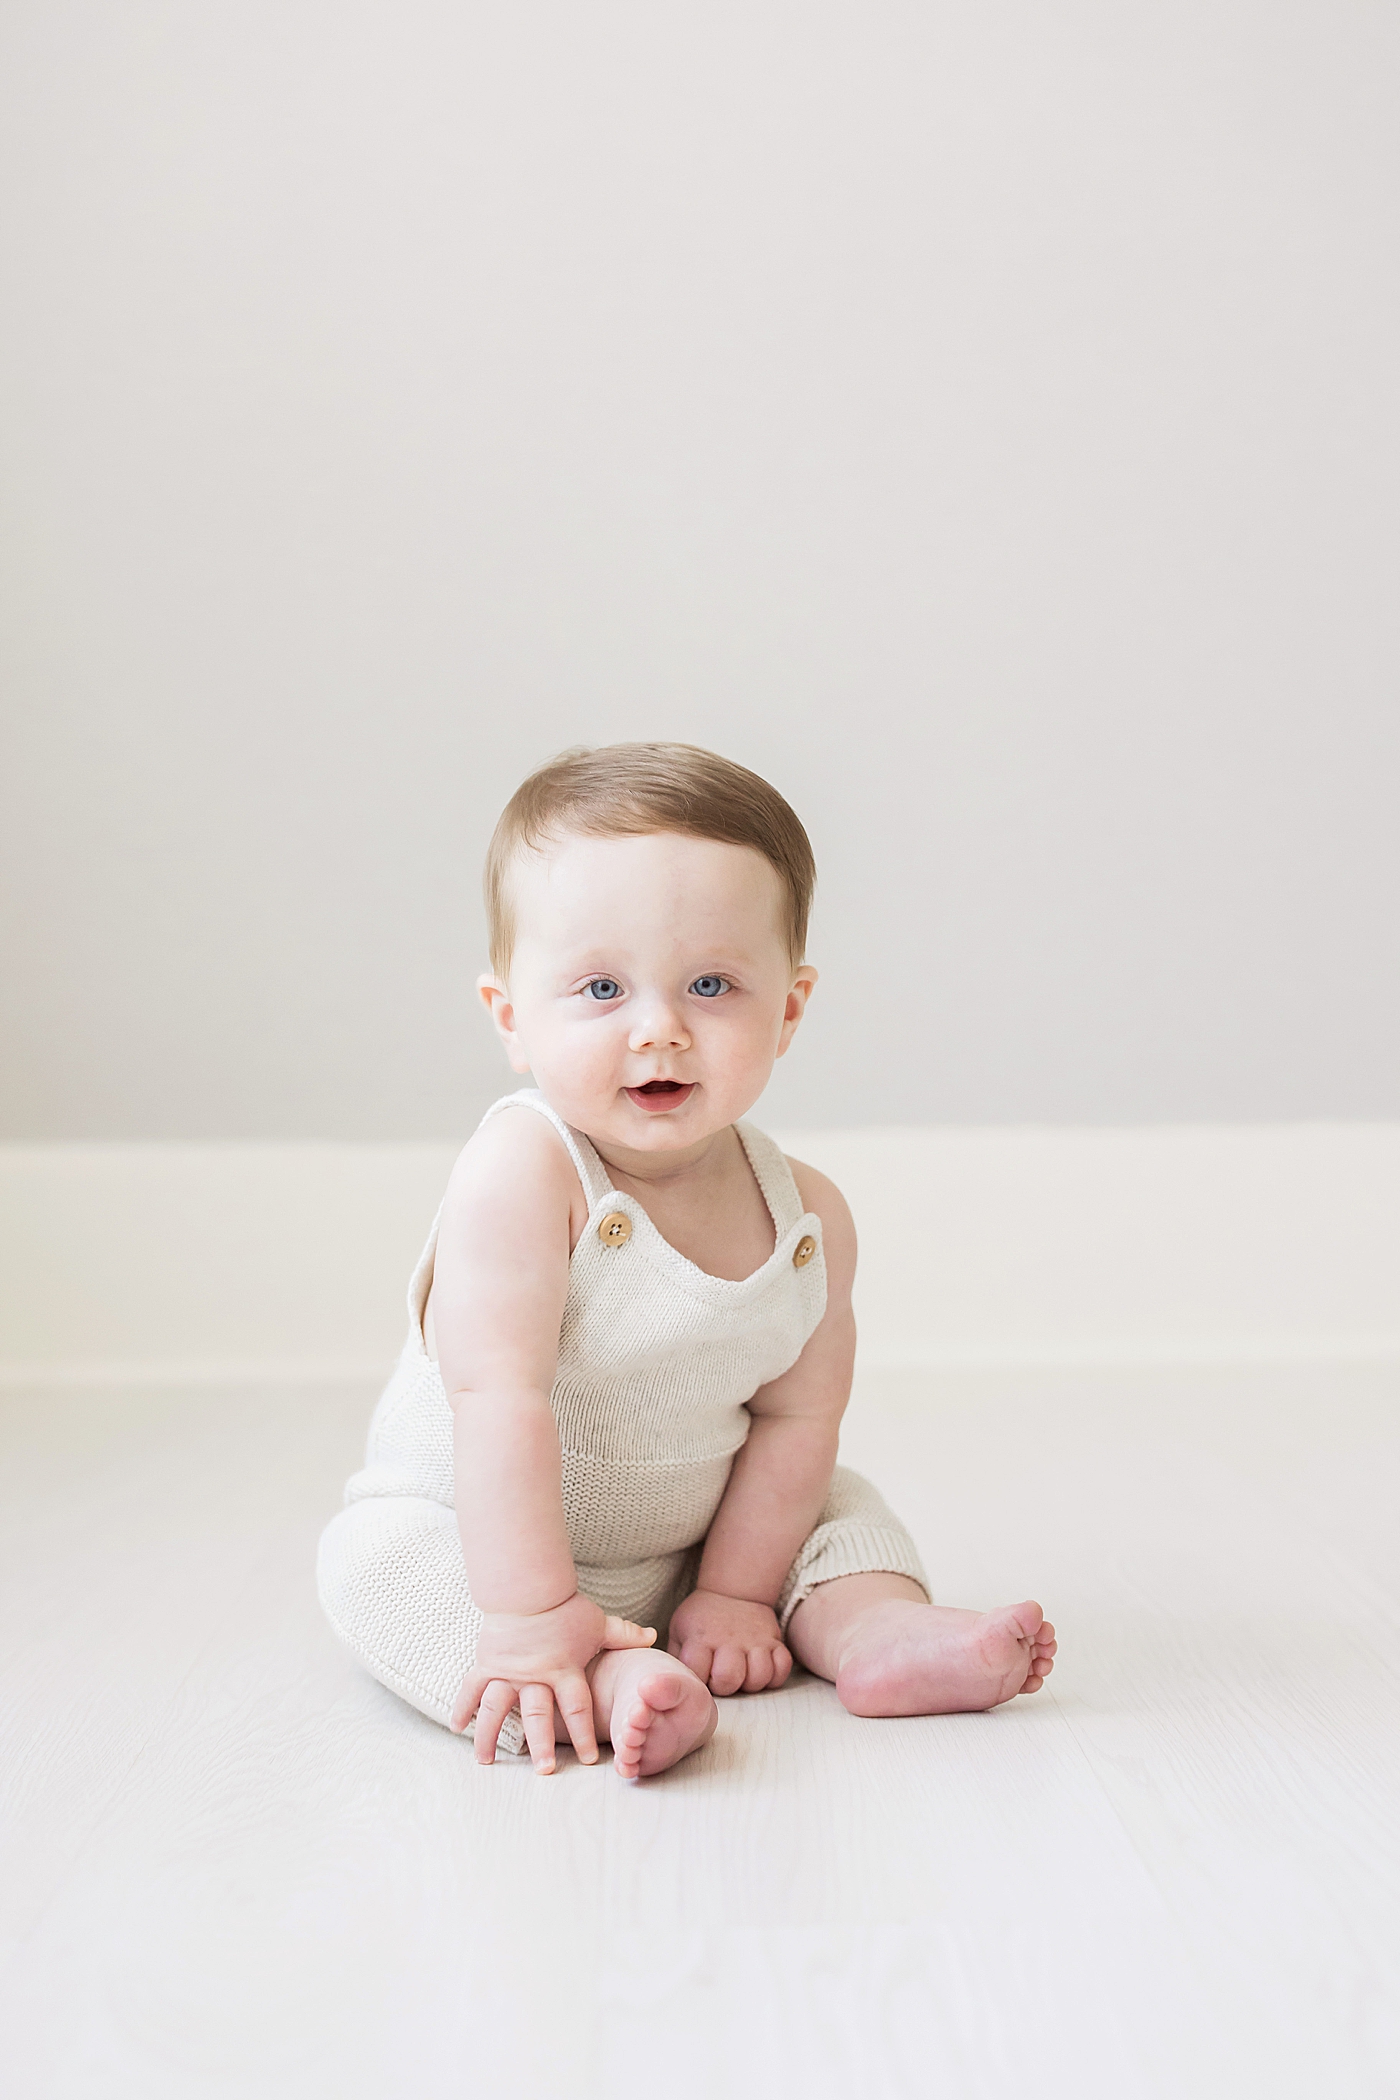 Milestones you don't want to miss - six months photographed by Fresh Light Photography